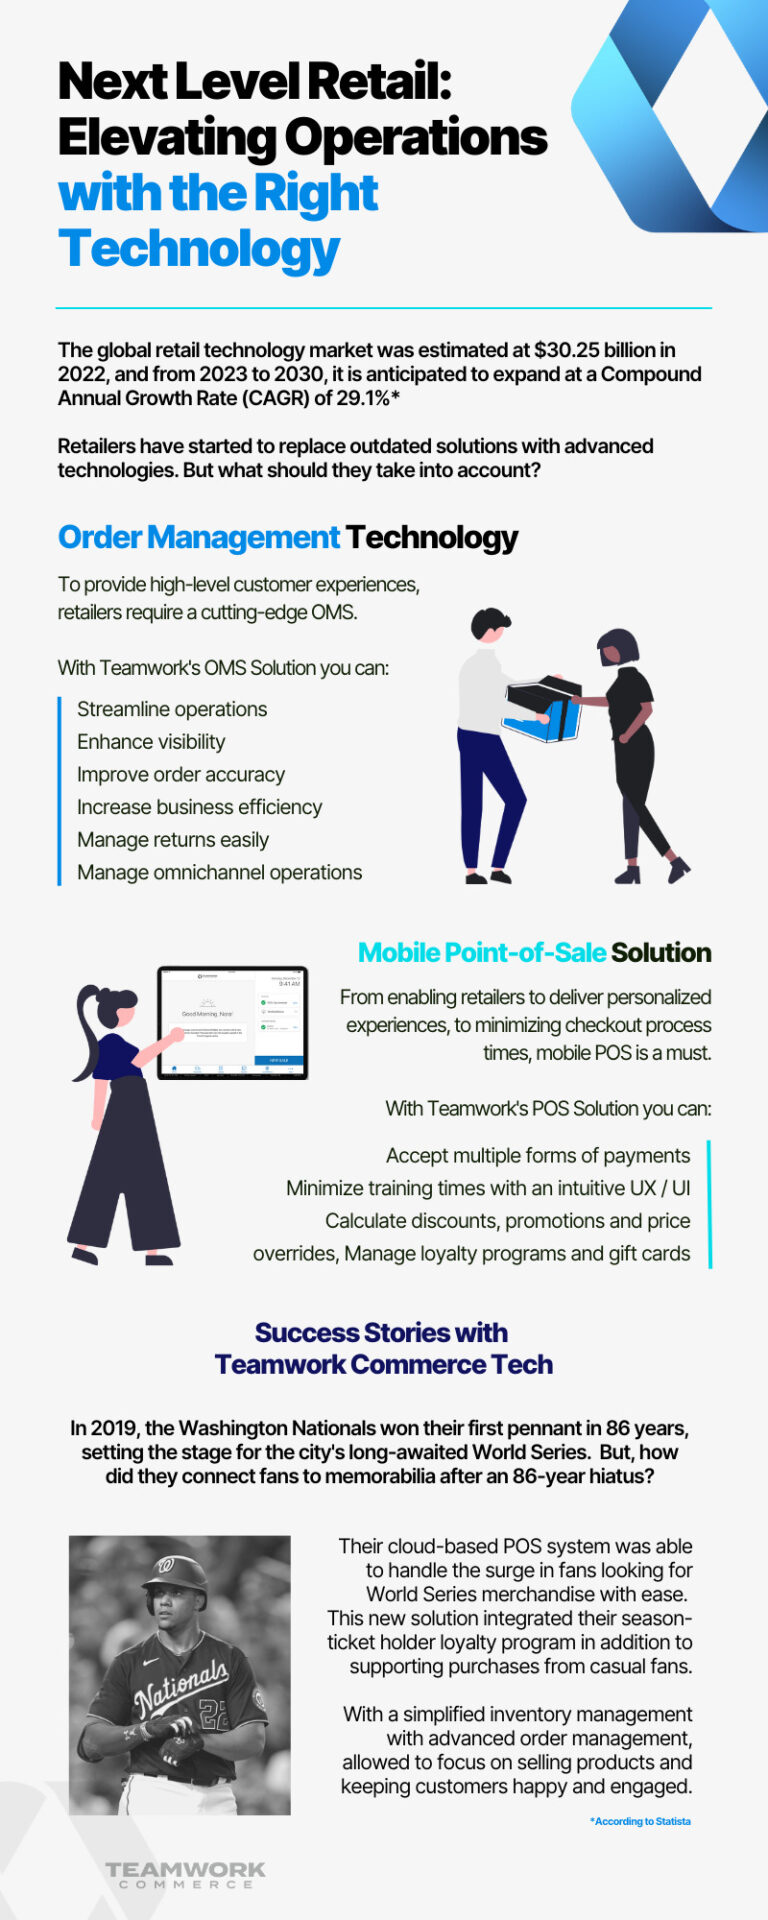 Next Level Retail: Elevating Operations with the Right Technology Infographic